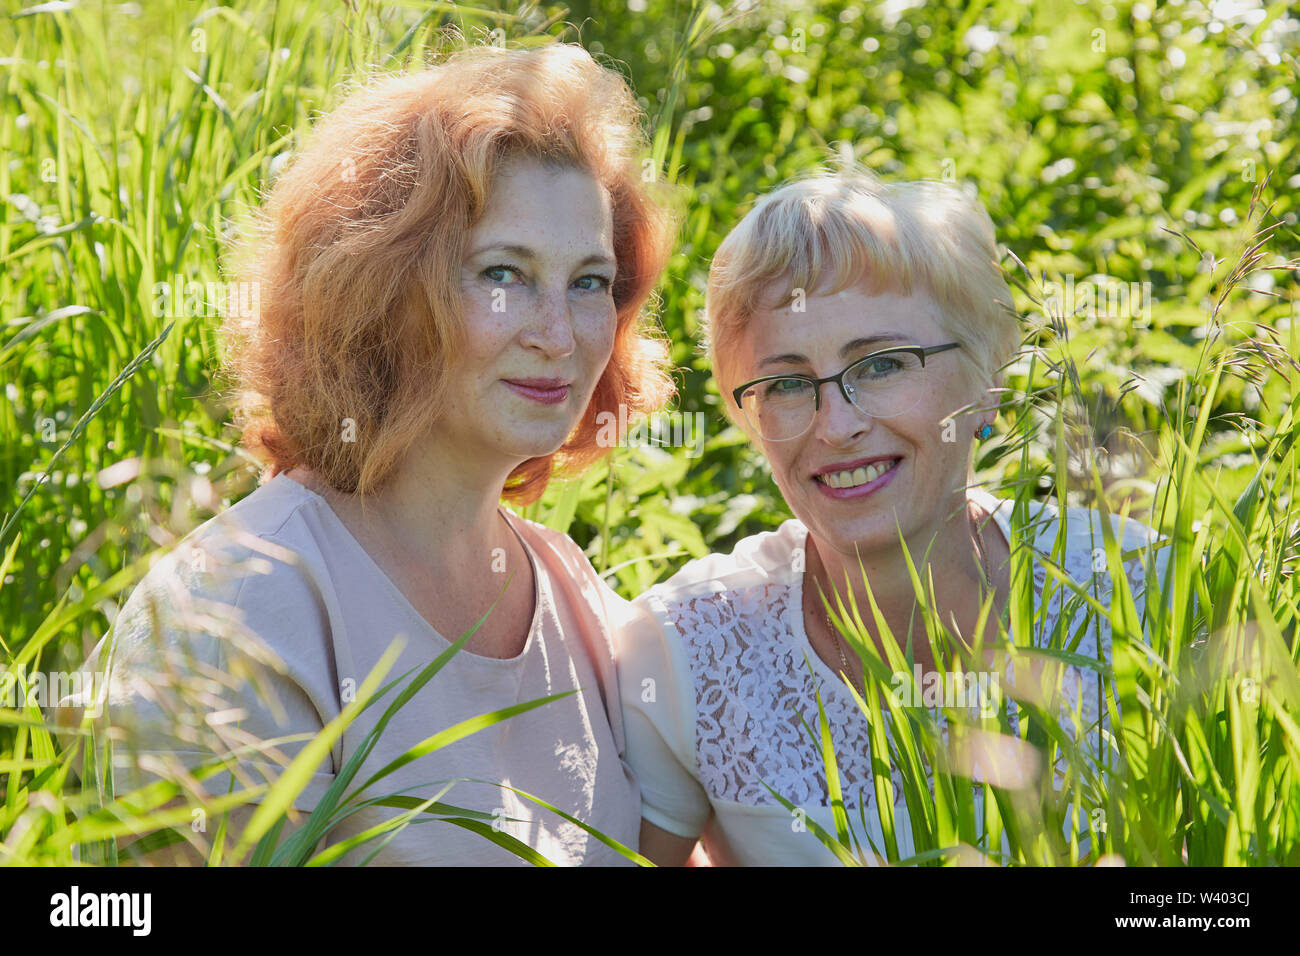 Two female friends having fun on nature. Chubby and slim middle-aged women pensioners in a green field Stock Photo